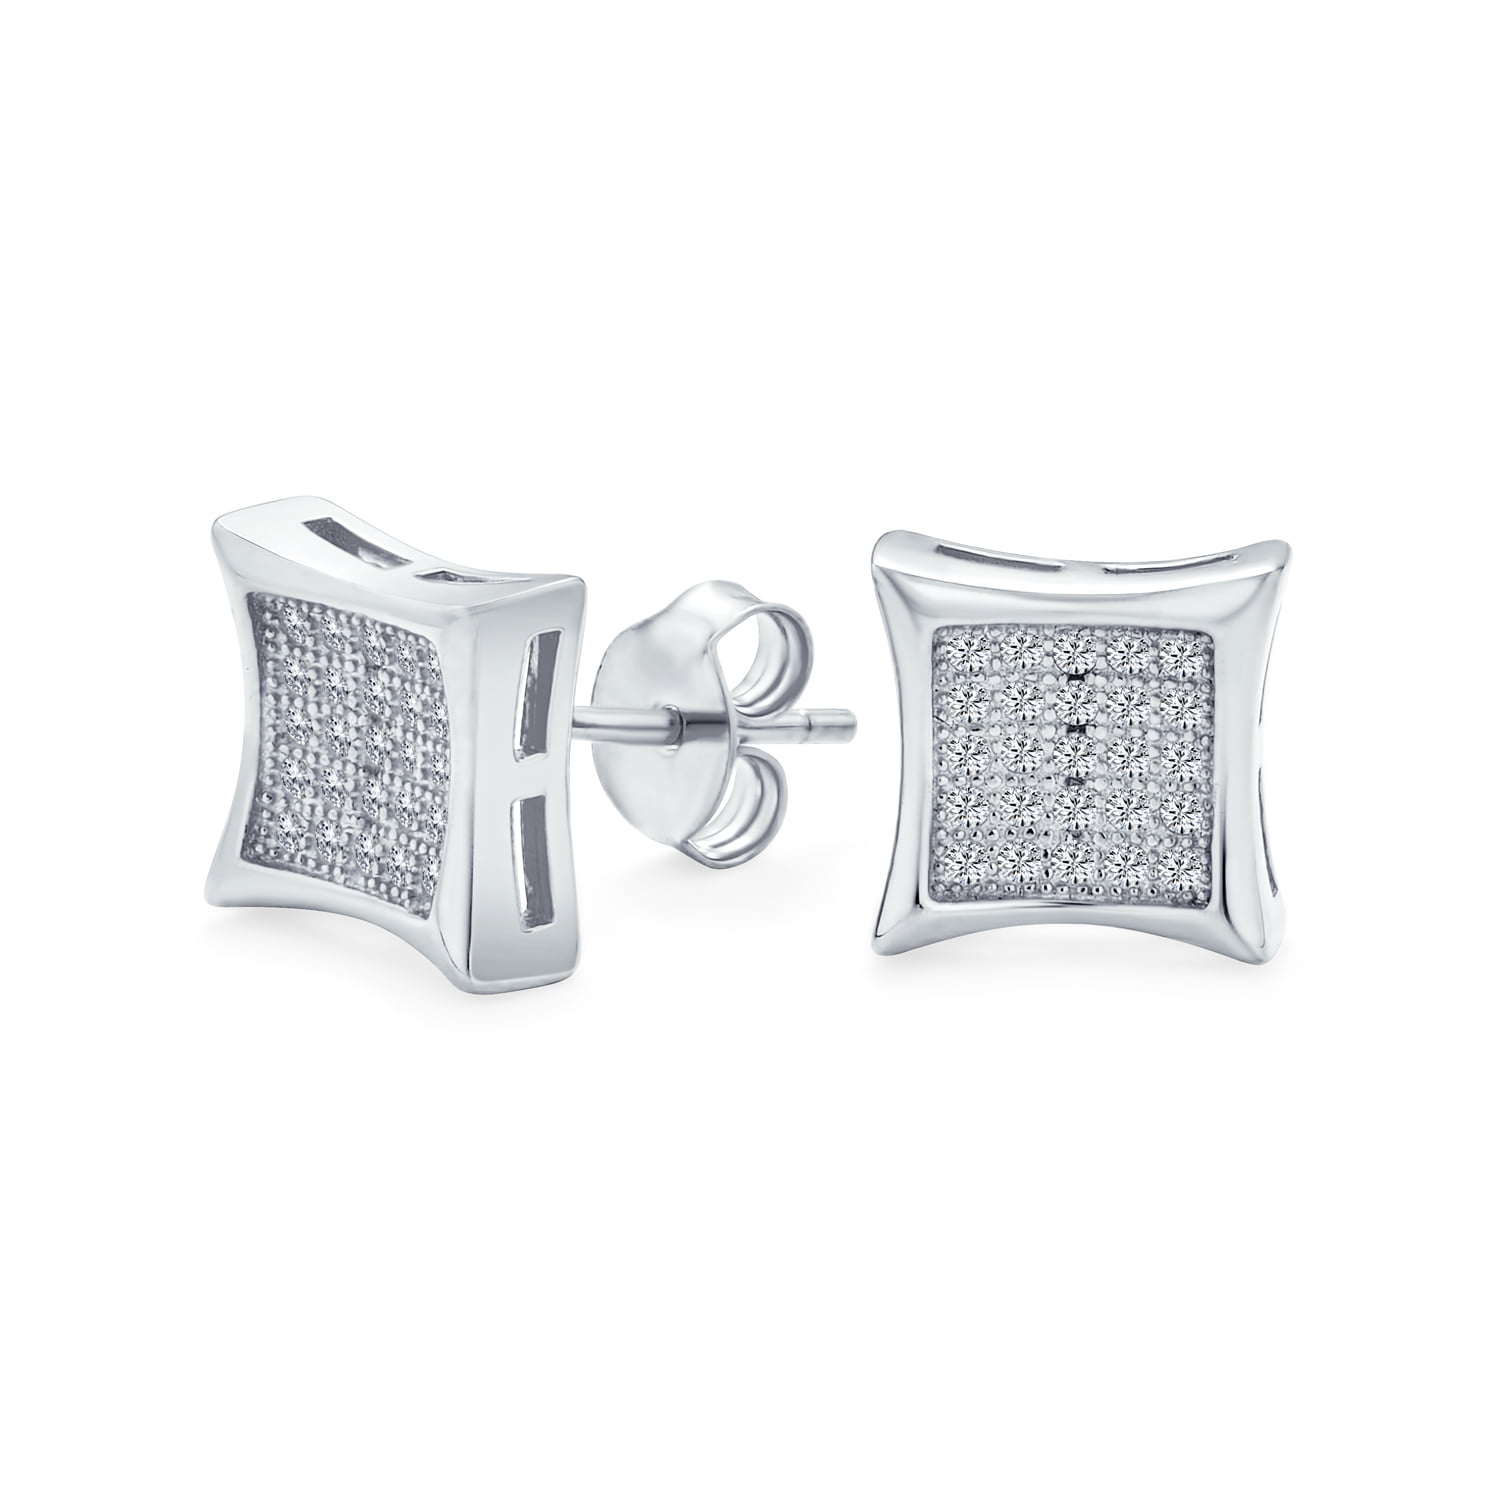 50 Stone Silver Flawless CZ Iced Out Kite Earrings for Men 